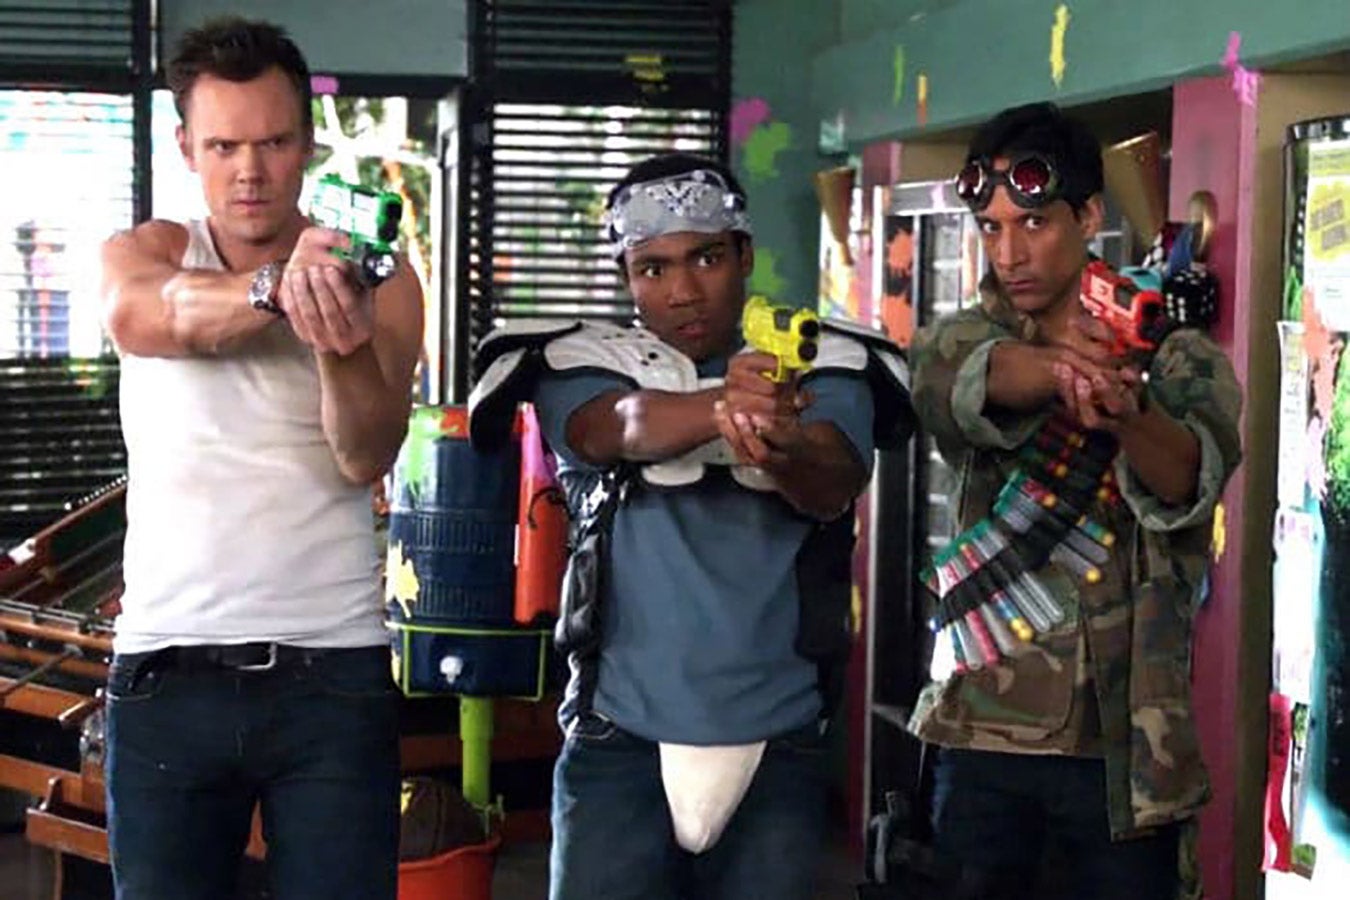 Jeff, Troy, and Abed look intensely ahead and put their makeshift guns at the camera.